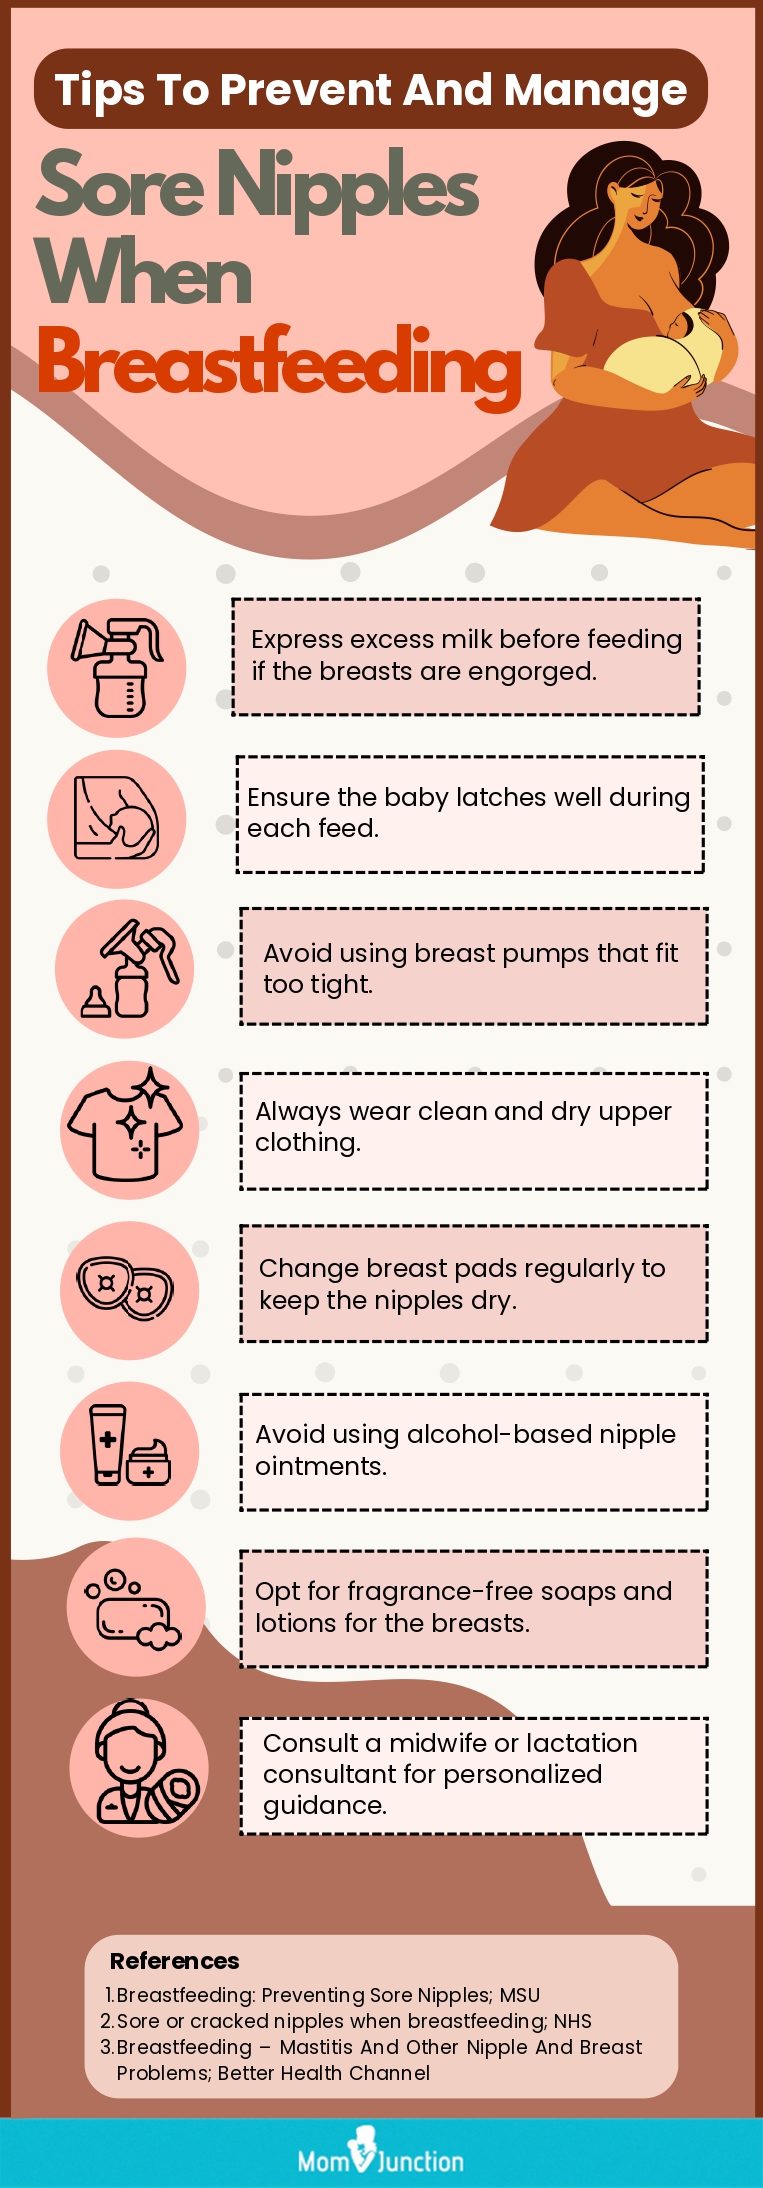 https://www.momjunction.com/wp-content/uploads/2019/02/Tips-To-Prevent-And-Manage-Sore-Nipples-When-Breastfeeding.jpg